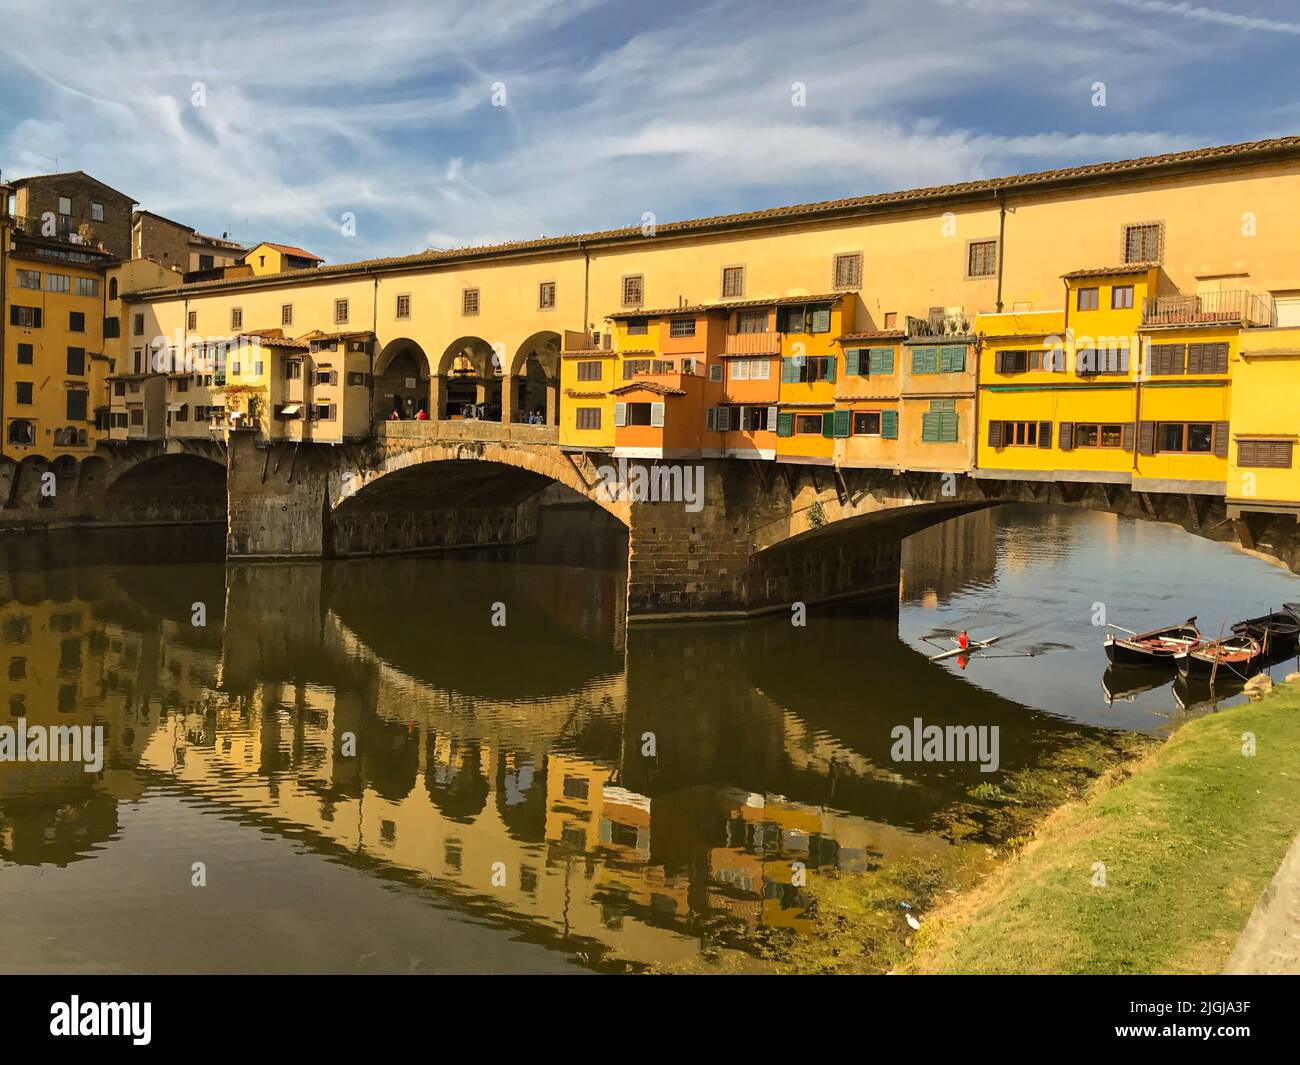 View of the Ponte Vecchio - Old Bridge - in Florence (Firenze) - by the river Arno with blue sky and reflections in the water. Famous landmark in Tusc Stock Photo